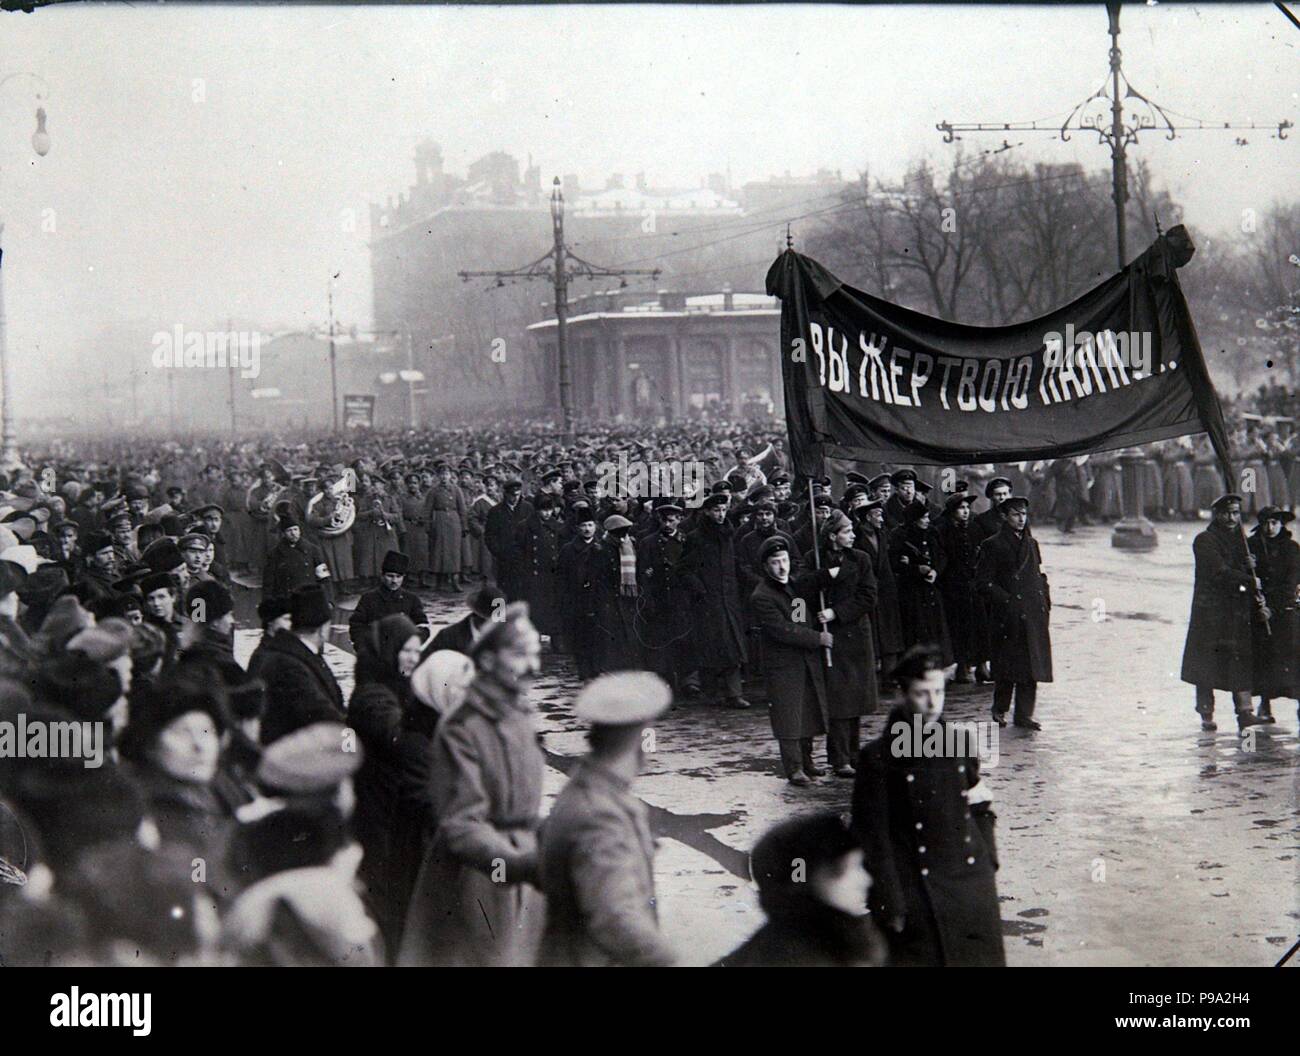 Funeral ceremony of February Revolution Victims in Petrograd. March 1917. Museum: Russian State Film and Photo Archive, Krasnogorsk. Stock Photo